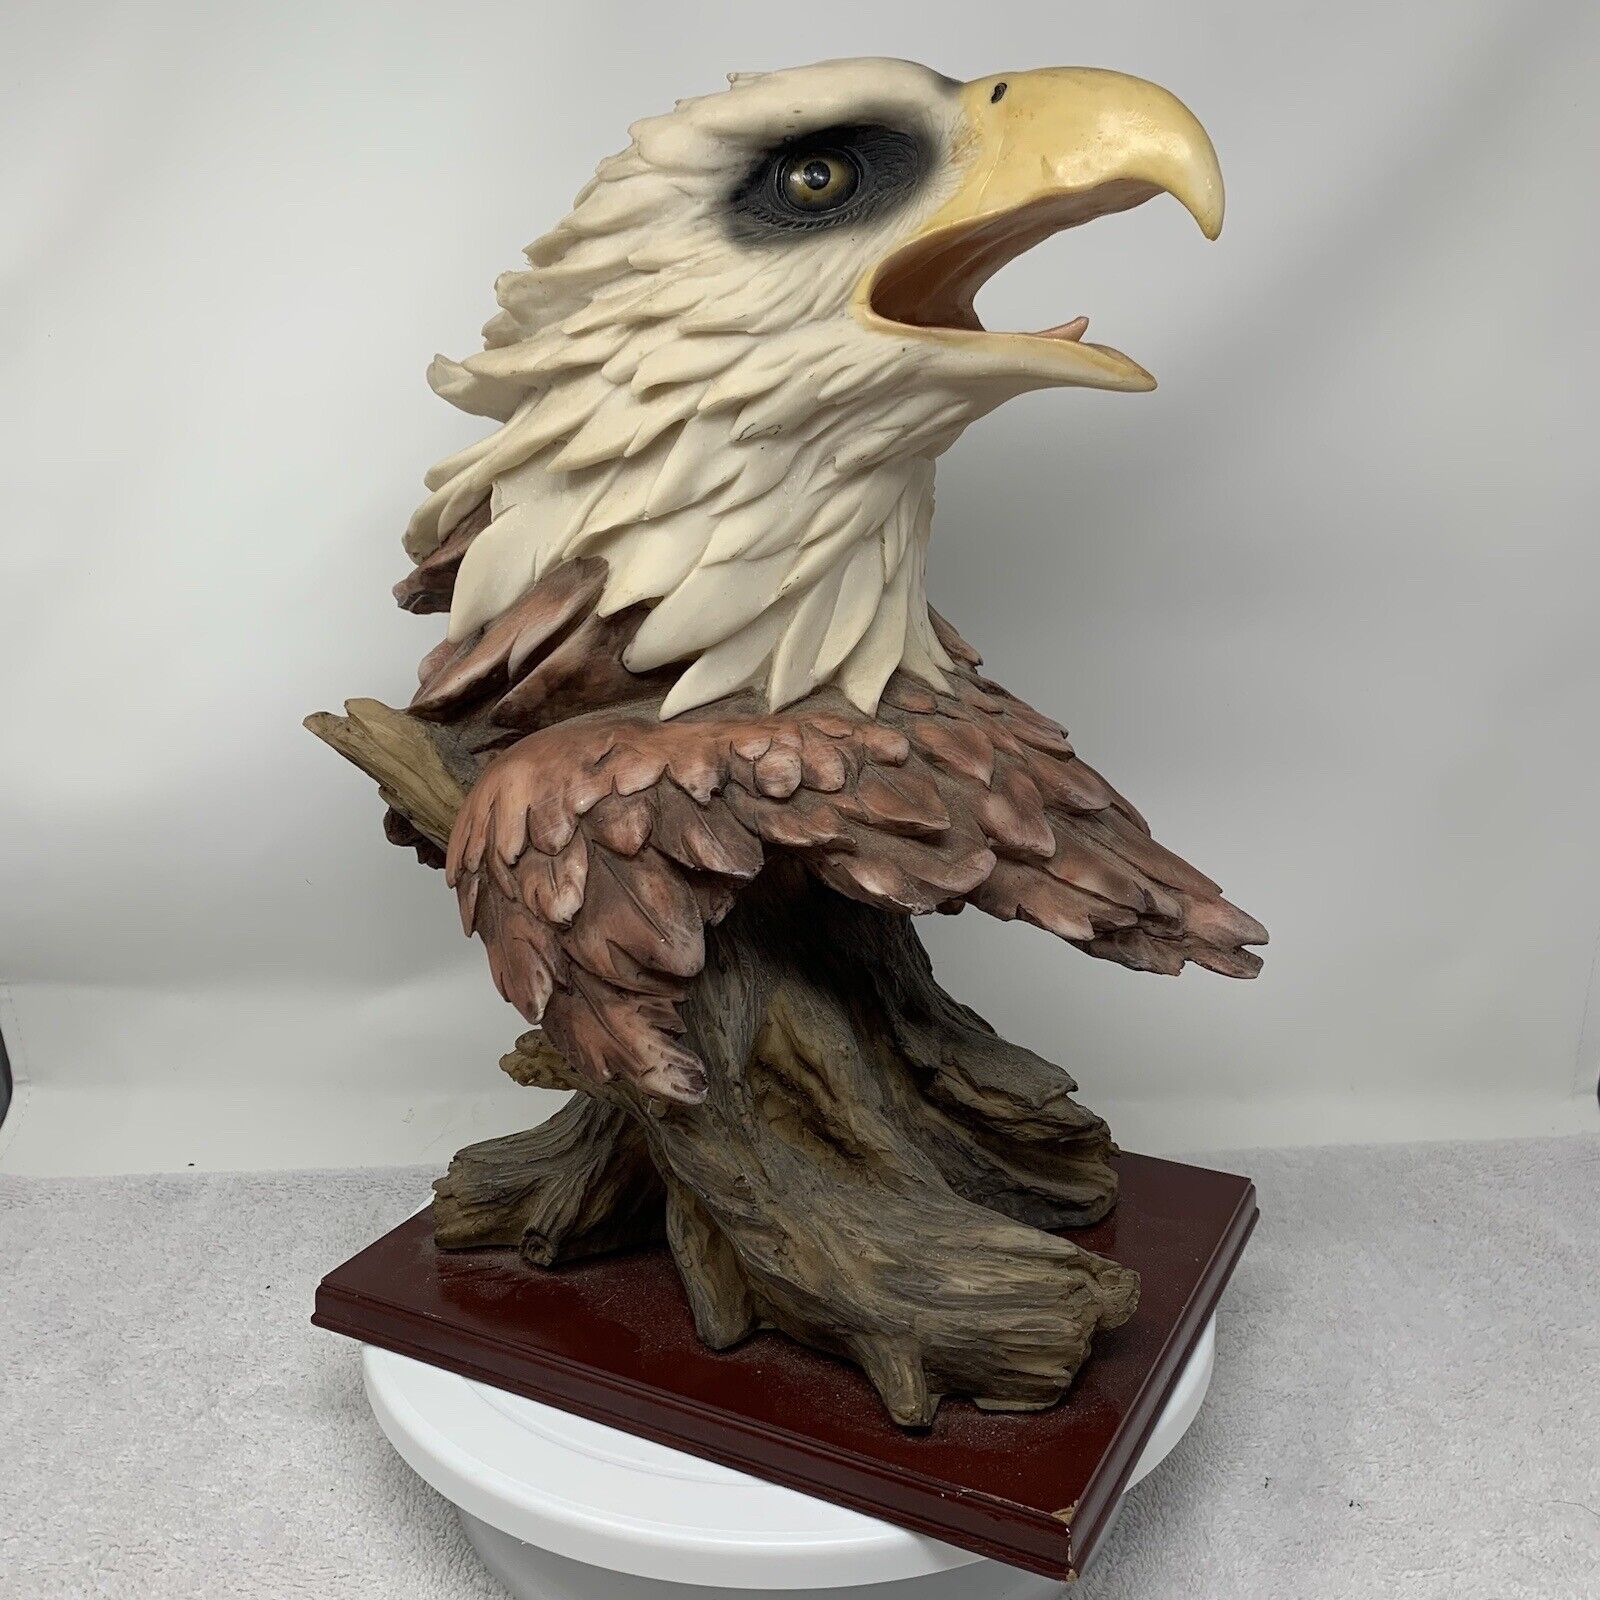 Vintage Meerchi Eagle Head Bust Statue 14 Inches Tall On Wooden Base MRH